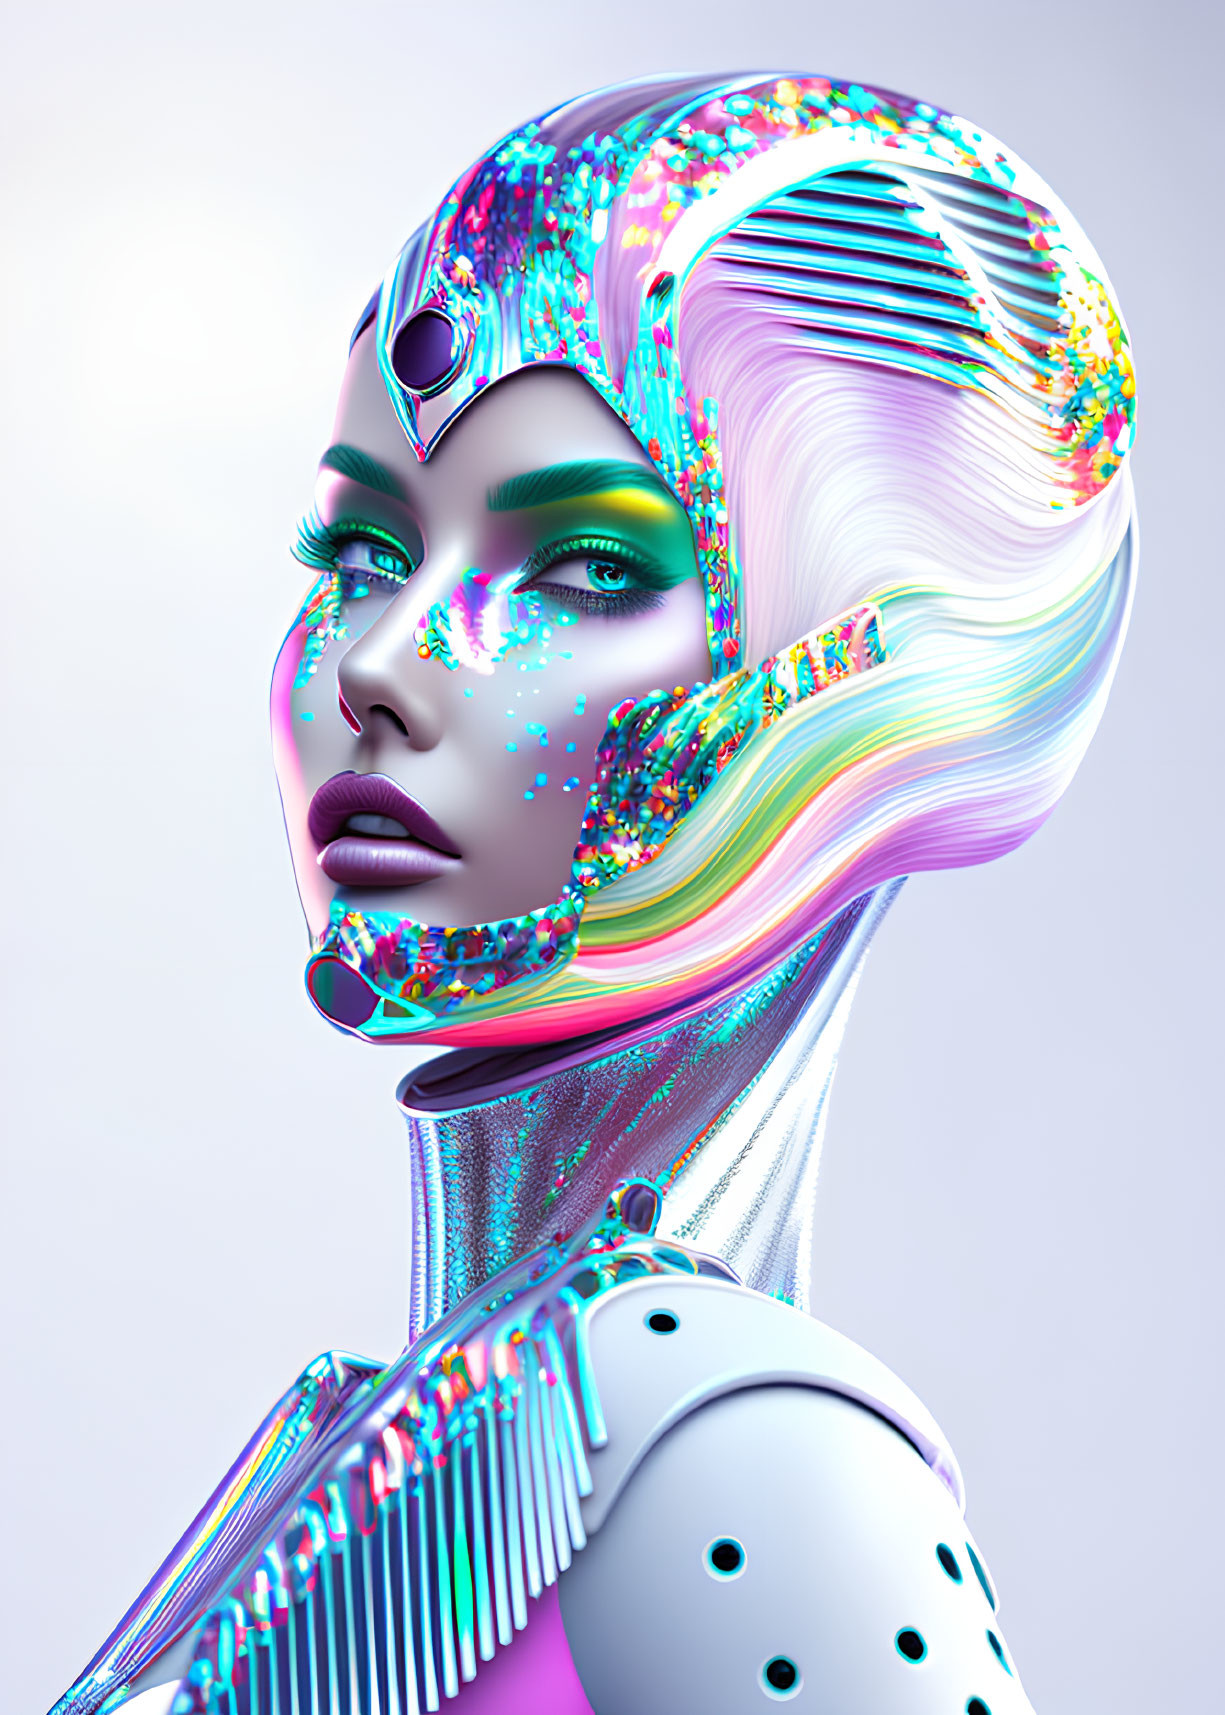 Colorful holographic female android with vibrant skin textures and metallic body details on pale background